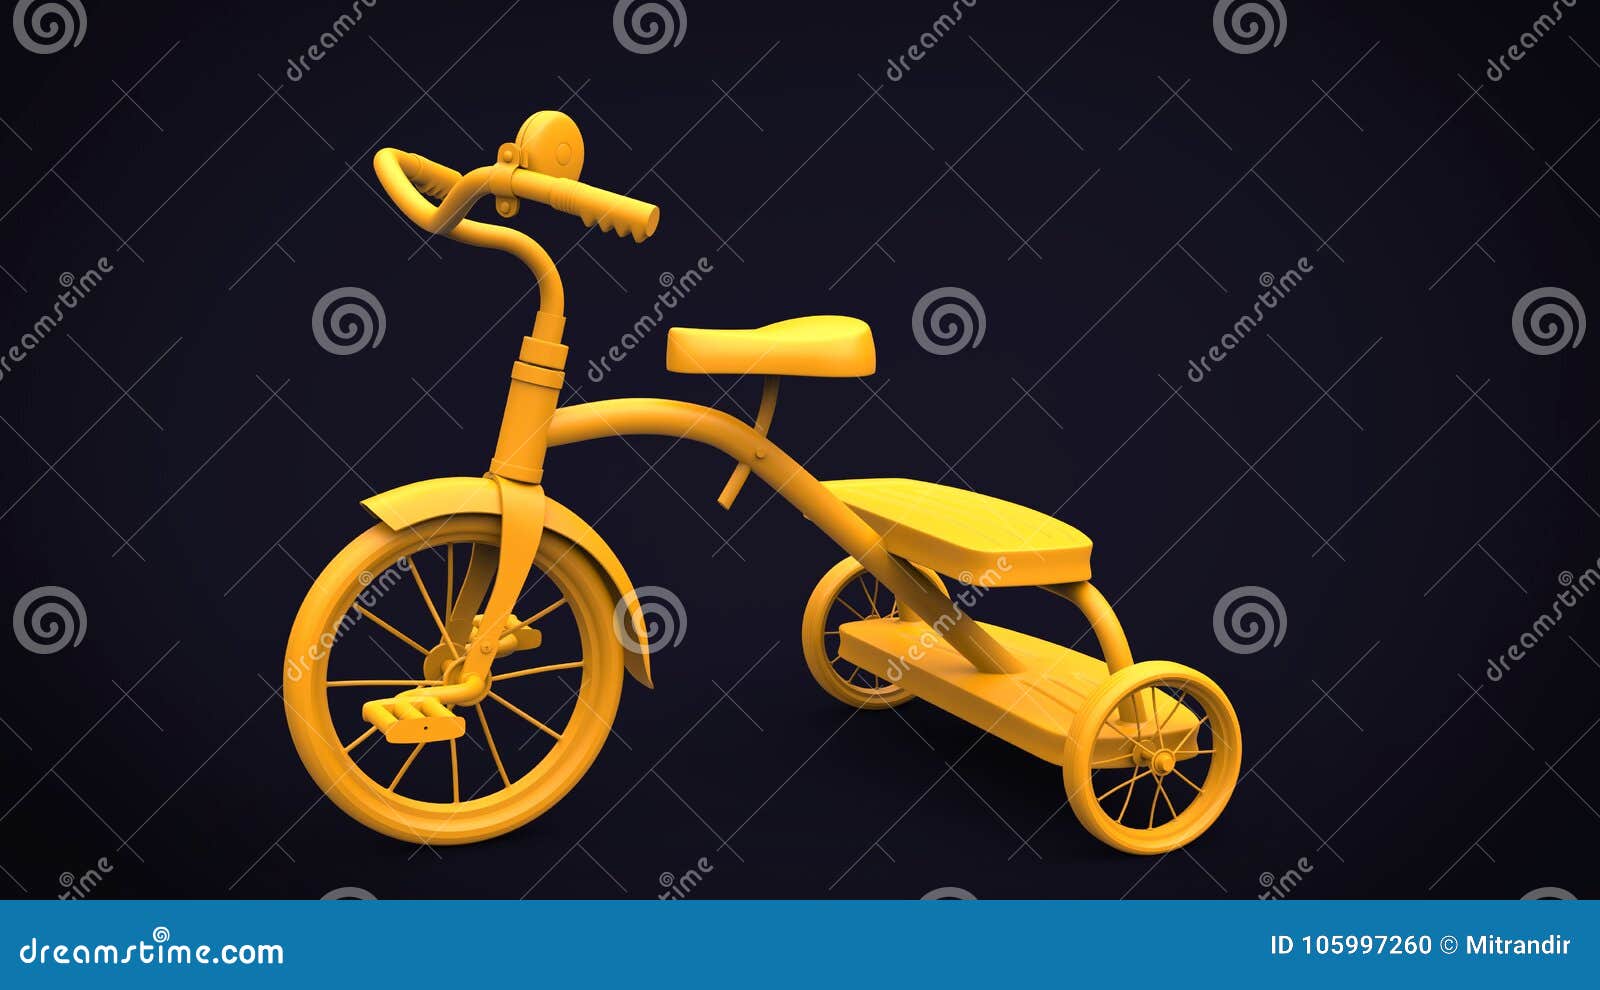 vintage-yellow-toy-tricycle-isolated-black-background-105997260.jpg